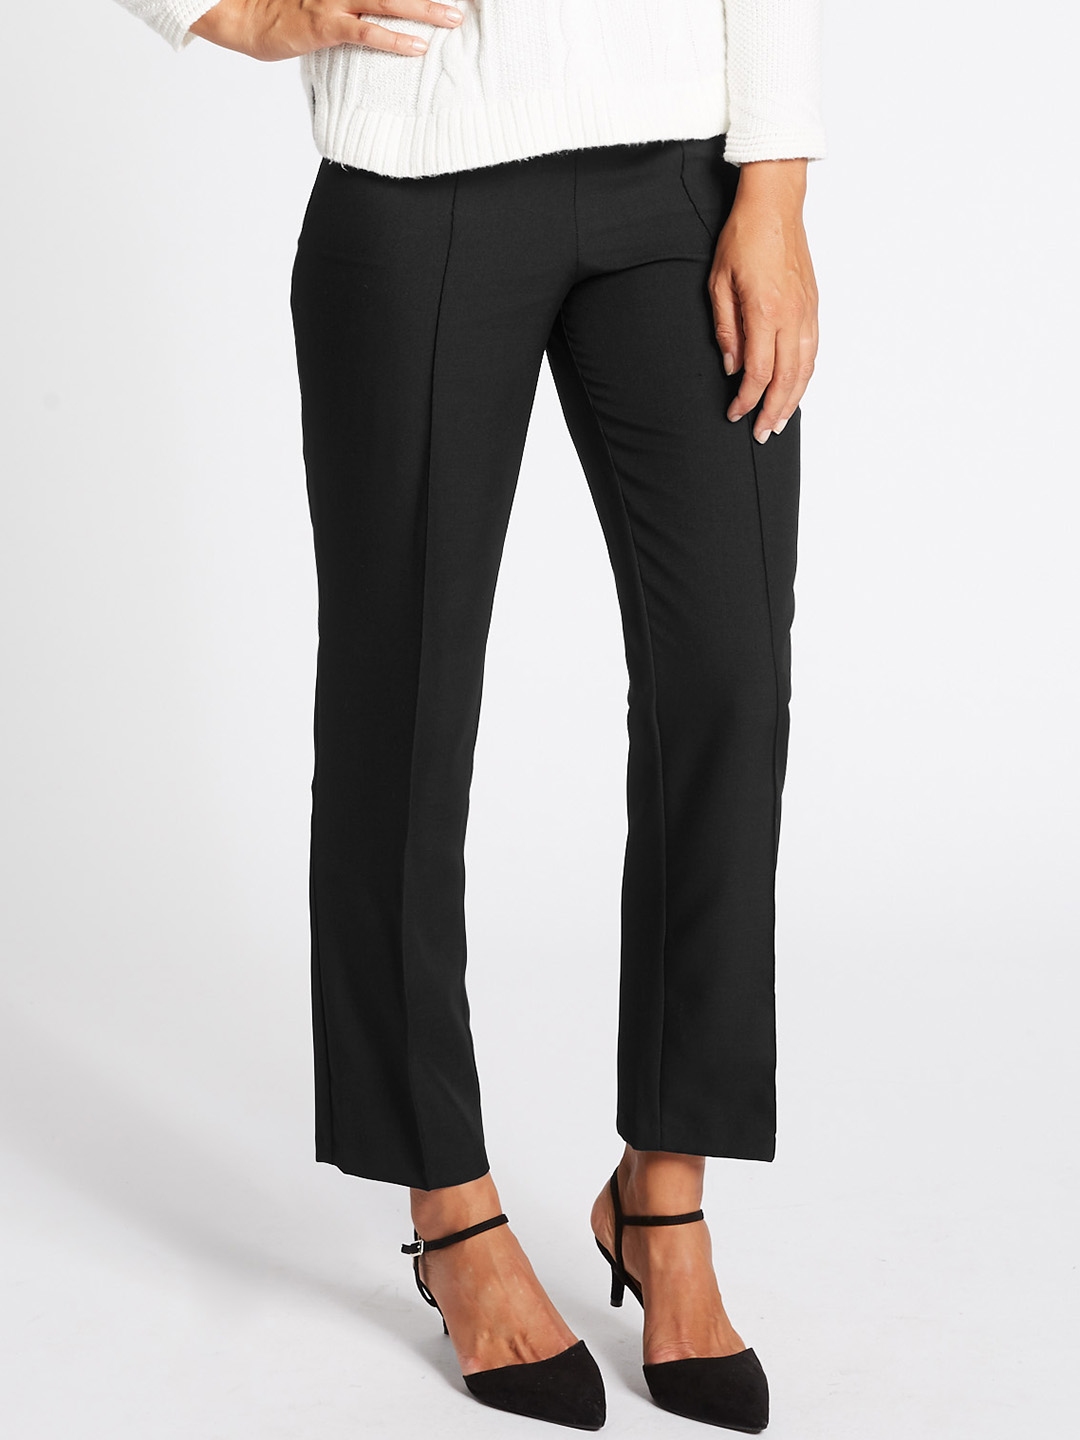 Discover more than 51 cigarette trousers marks and spencer super hot ...